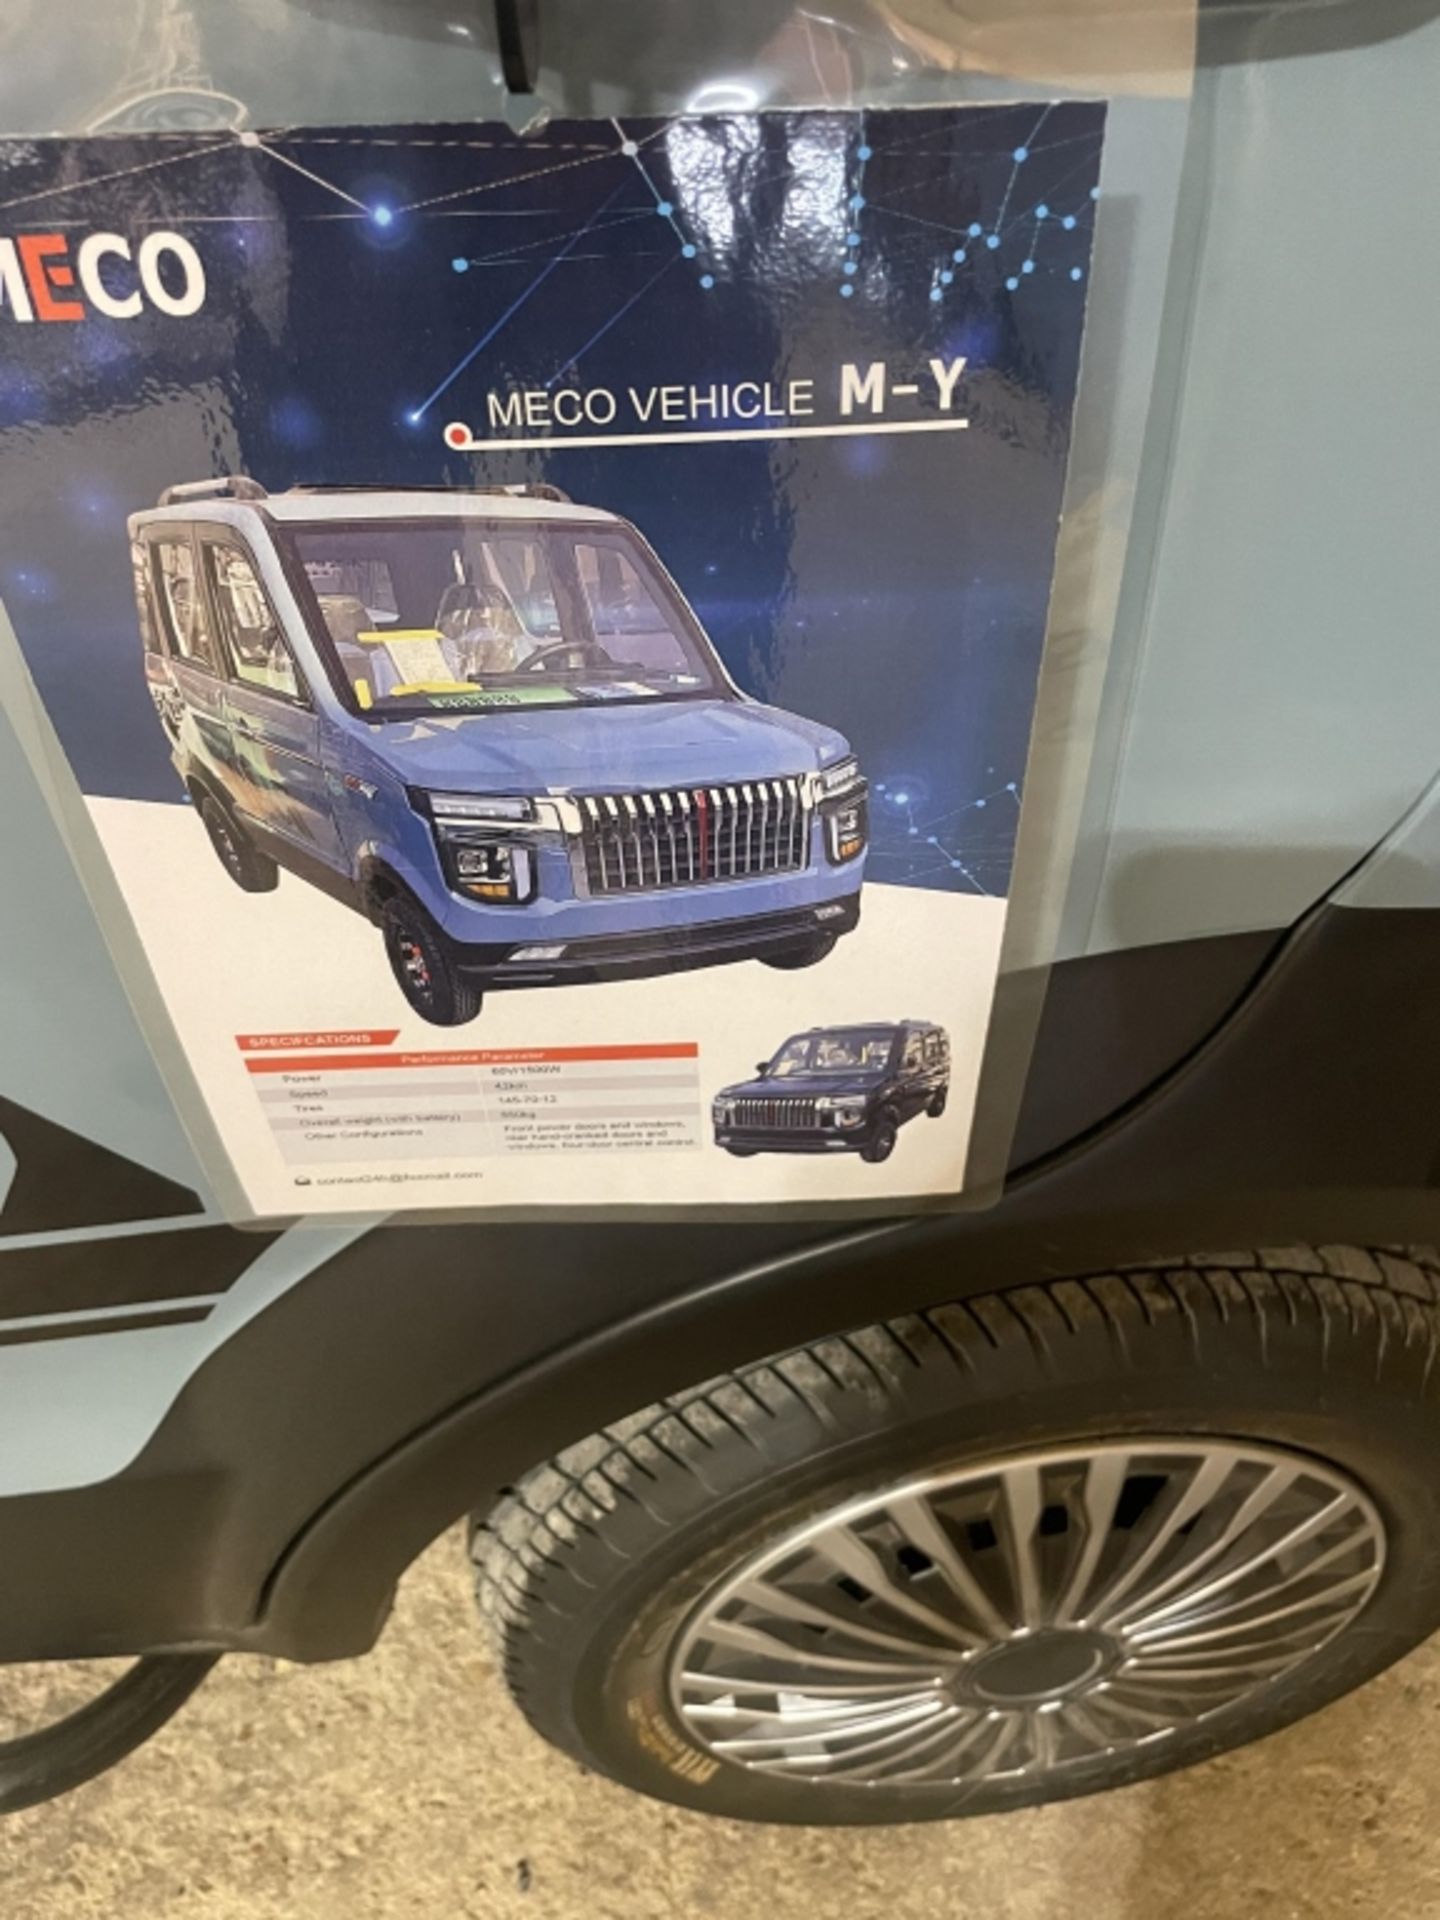 MECO M-Y Electric Vehicle - Image 22 of 25